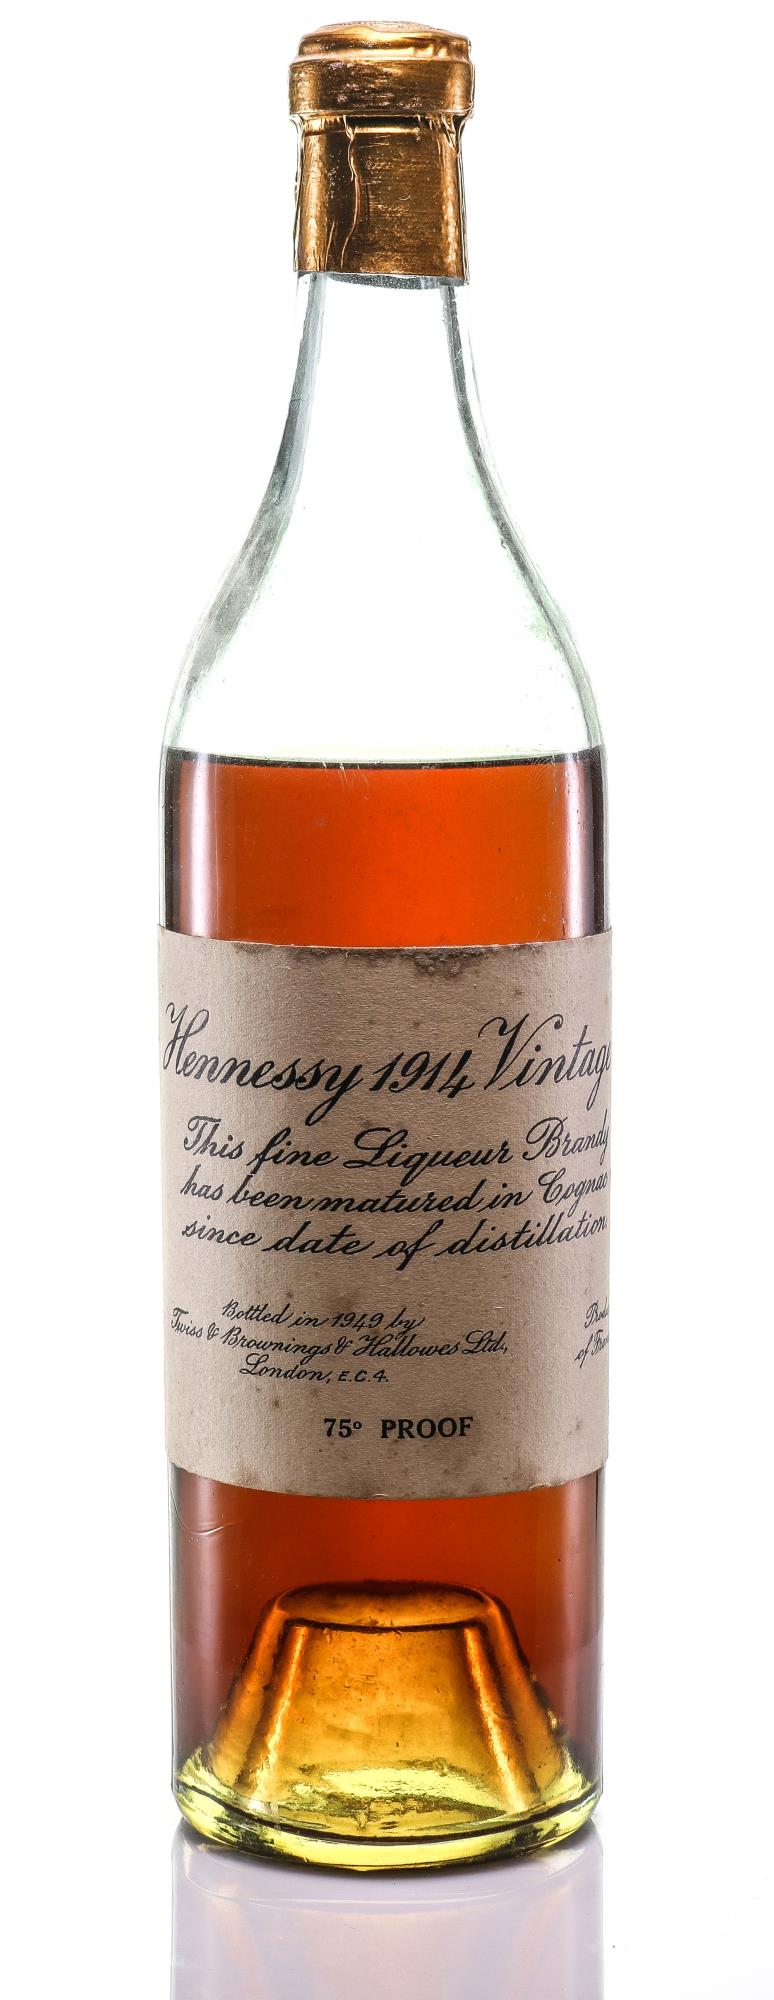 1914 Hennessy Twiss Brownings Hallows Cognac - Rue Pinard